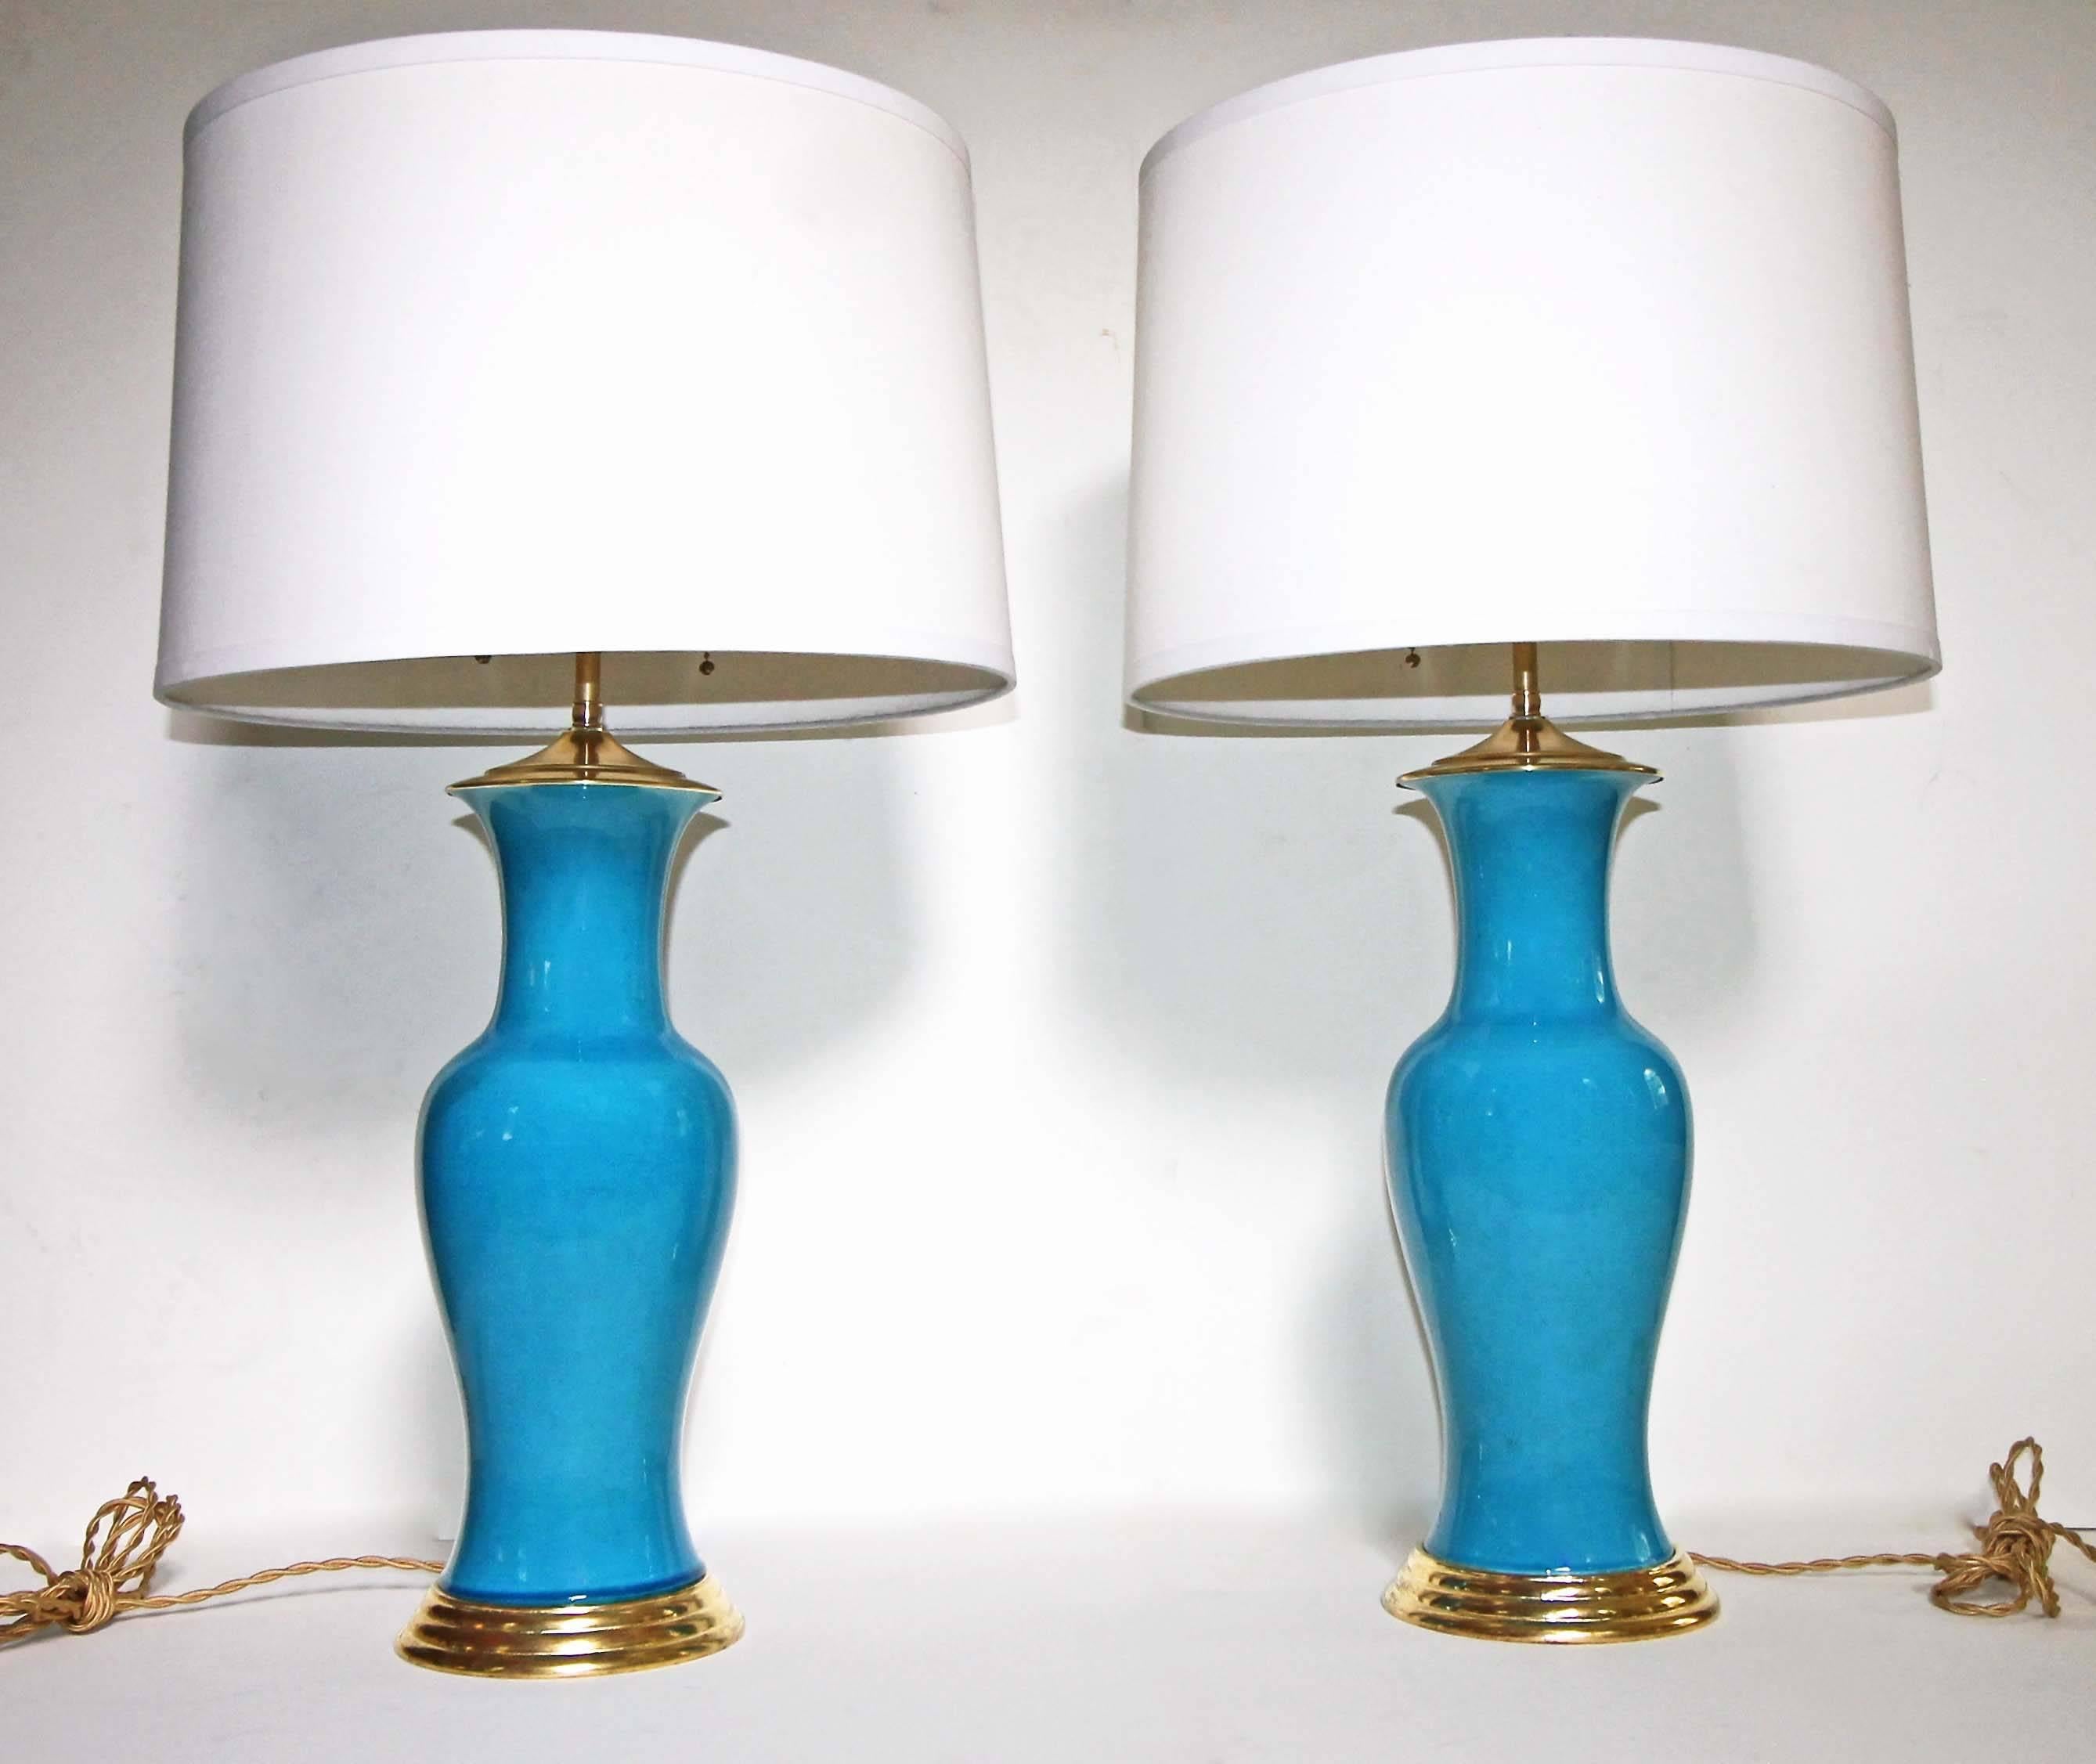 Pair of vibrant turquoise blue ceramic table lamps on 23-karat water gilt turned wood bases. Mid-Century hand thrown and glazed Japanese vases converted to lamps. Newly wired including new on/off double clusters, brass fittings and adjustable shade